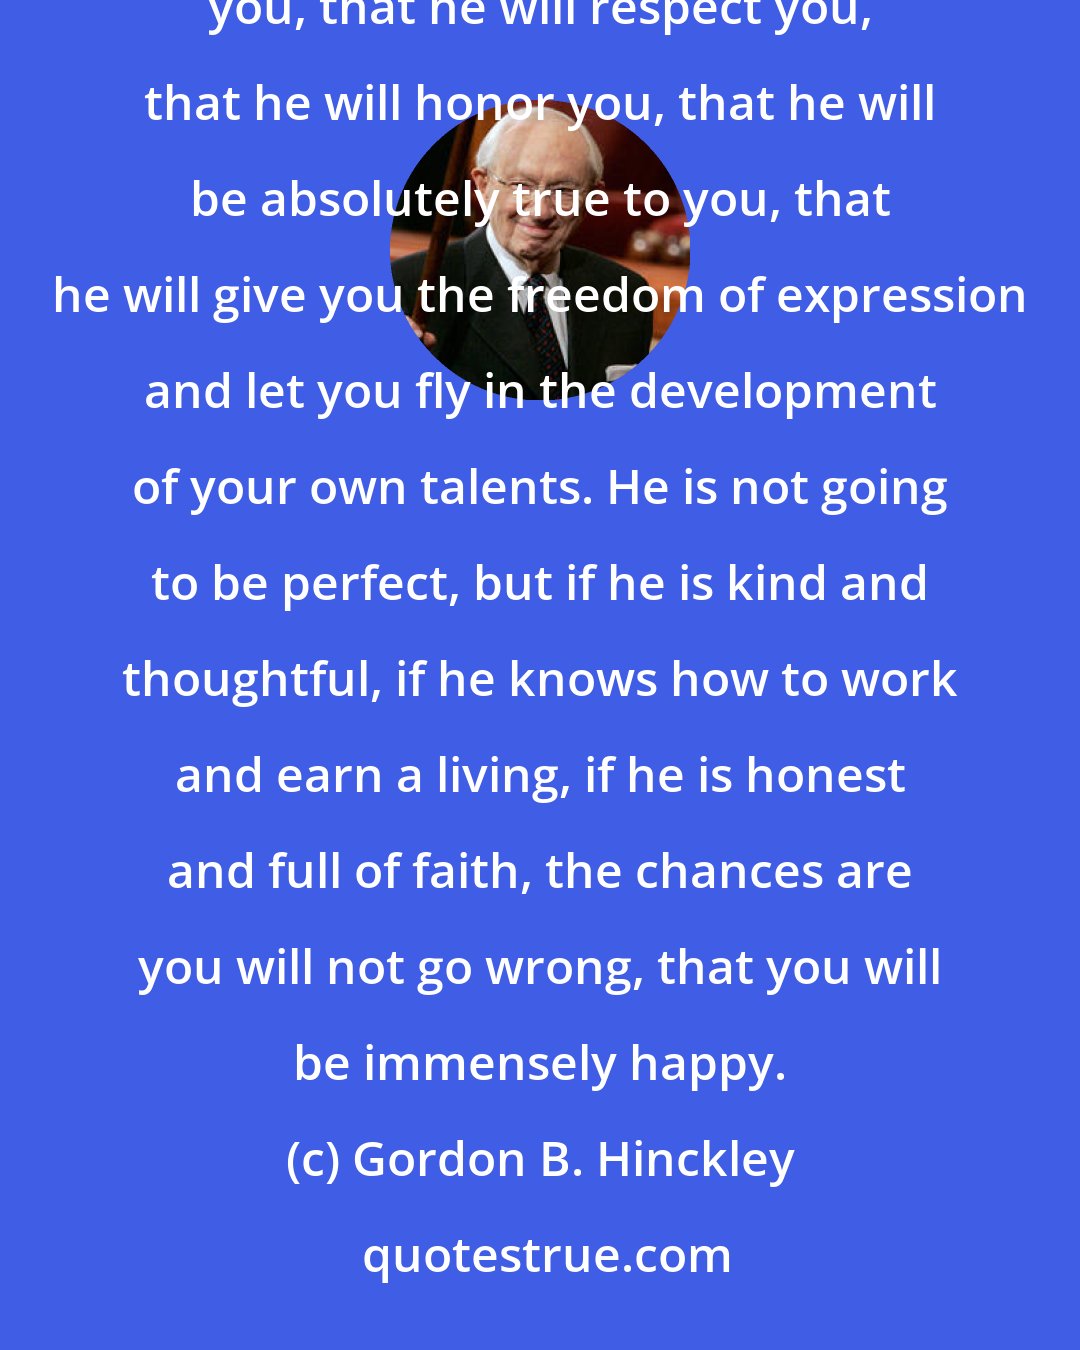 Gordon B. Hinckley: Aim high, but do not aim so high that you totally miss the target. What really matters is that he will love you, that he will respect you, that he will honor you, that he will be absolutely true to you, that he will give you the freedom of expression and let you fly in the development of your own talents. He is not going to be perfect, but if he is kind and thoughtful, if he knows how to work and earn a living, if he is honest and full of faith, the chances are you will not go wrong, that you will be immensely happy.